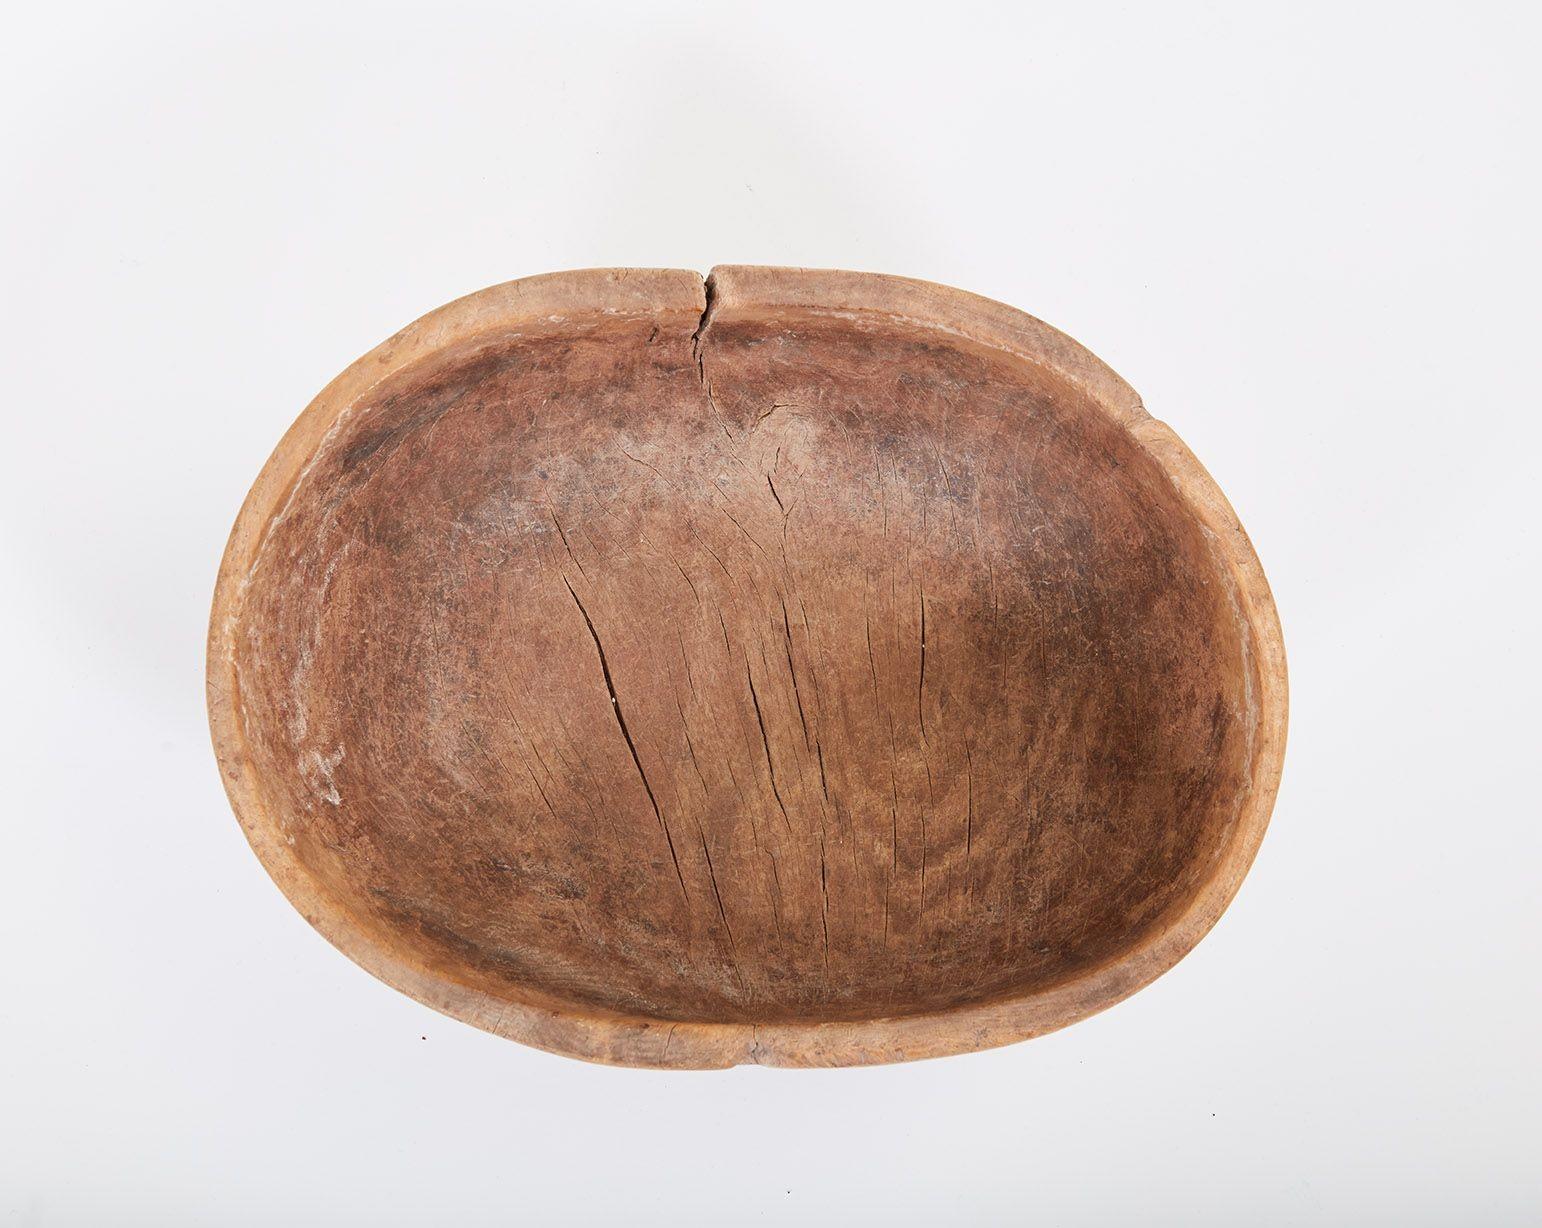 Good early 19th Century Swedish folk art root burl bowl of organic form, having owner's initials MLS on the underside, the whole with dry untouched surface.